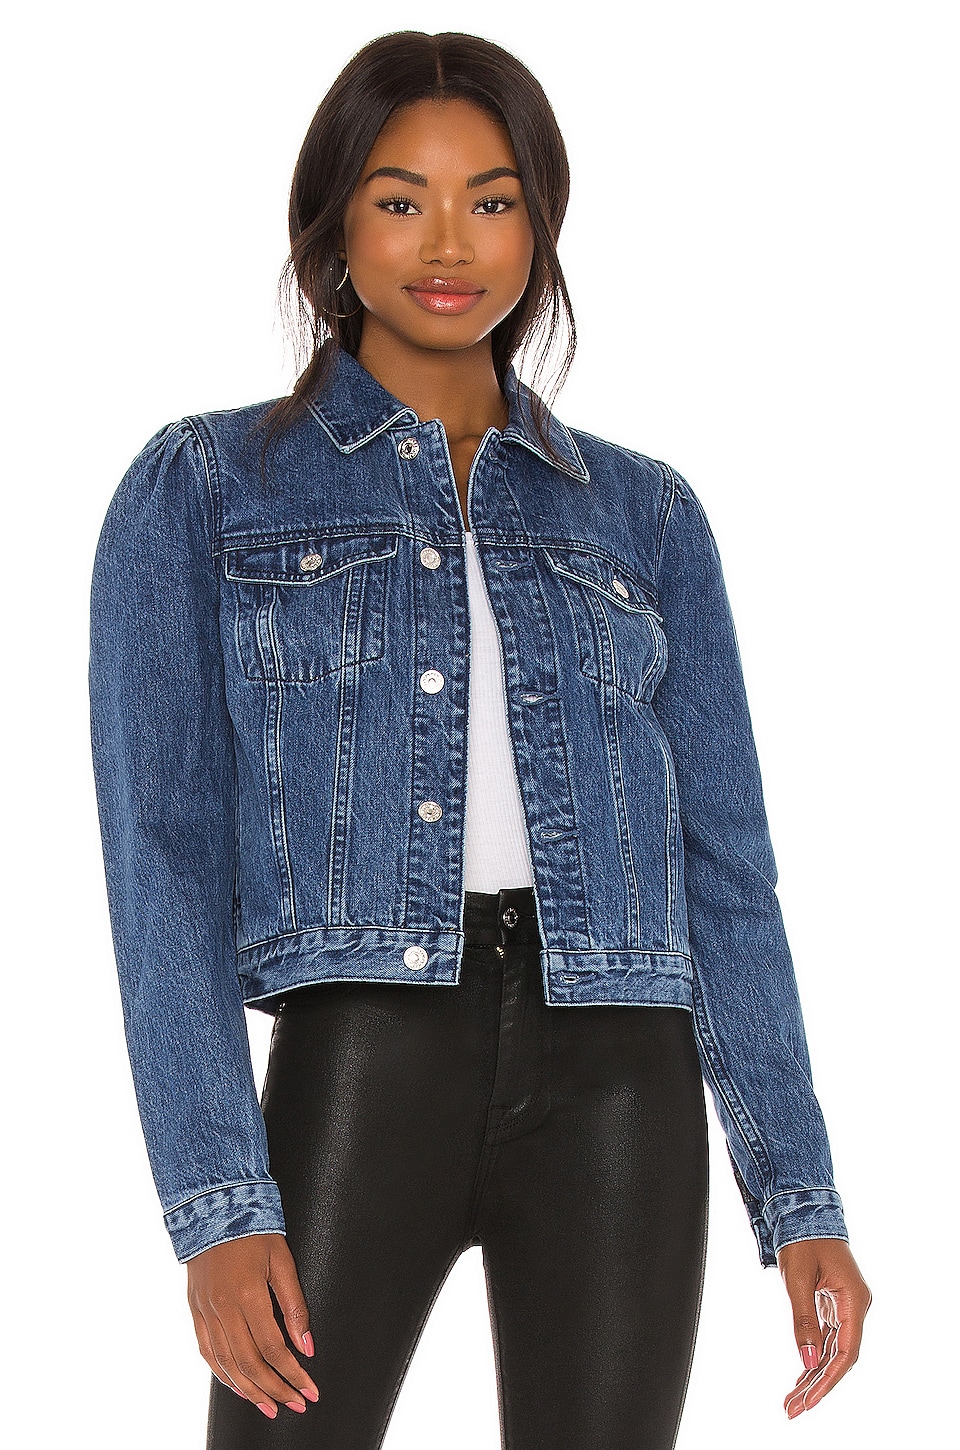 marriage routine valley 7 For All Mankind Puff Sleeve Classic Jean Jacket in Chambers | REVOLVE